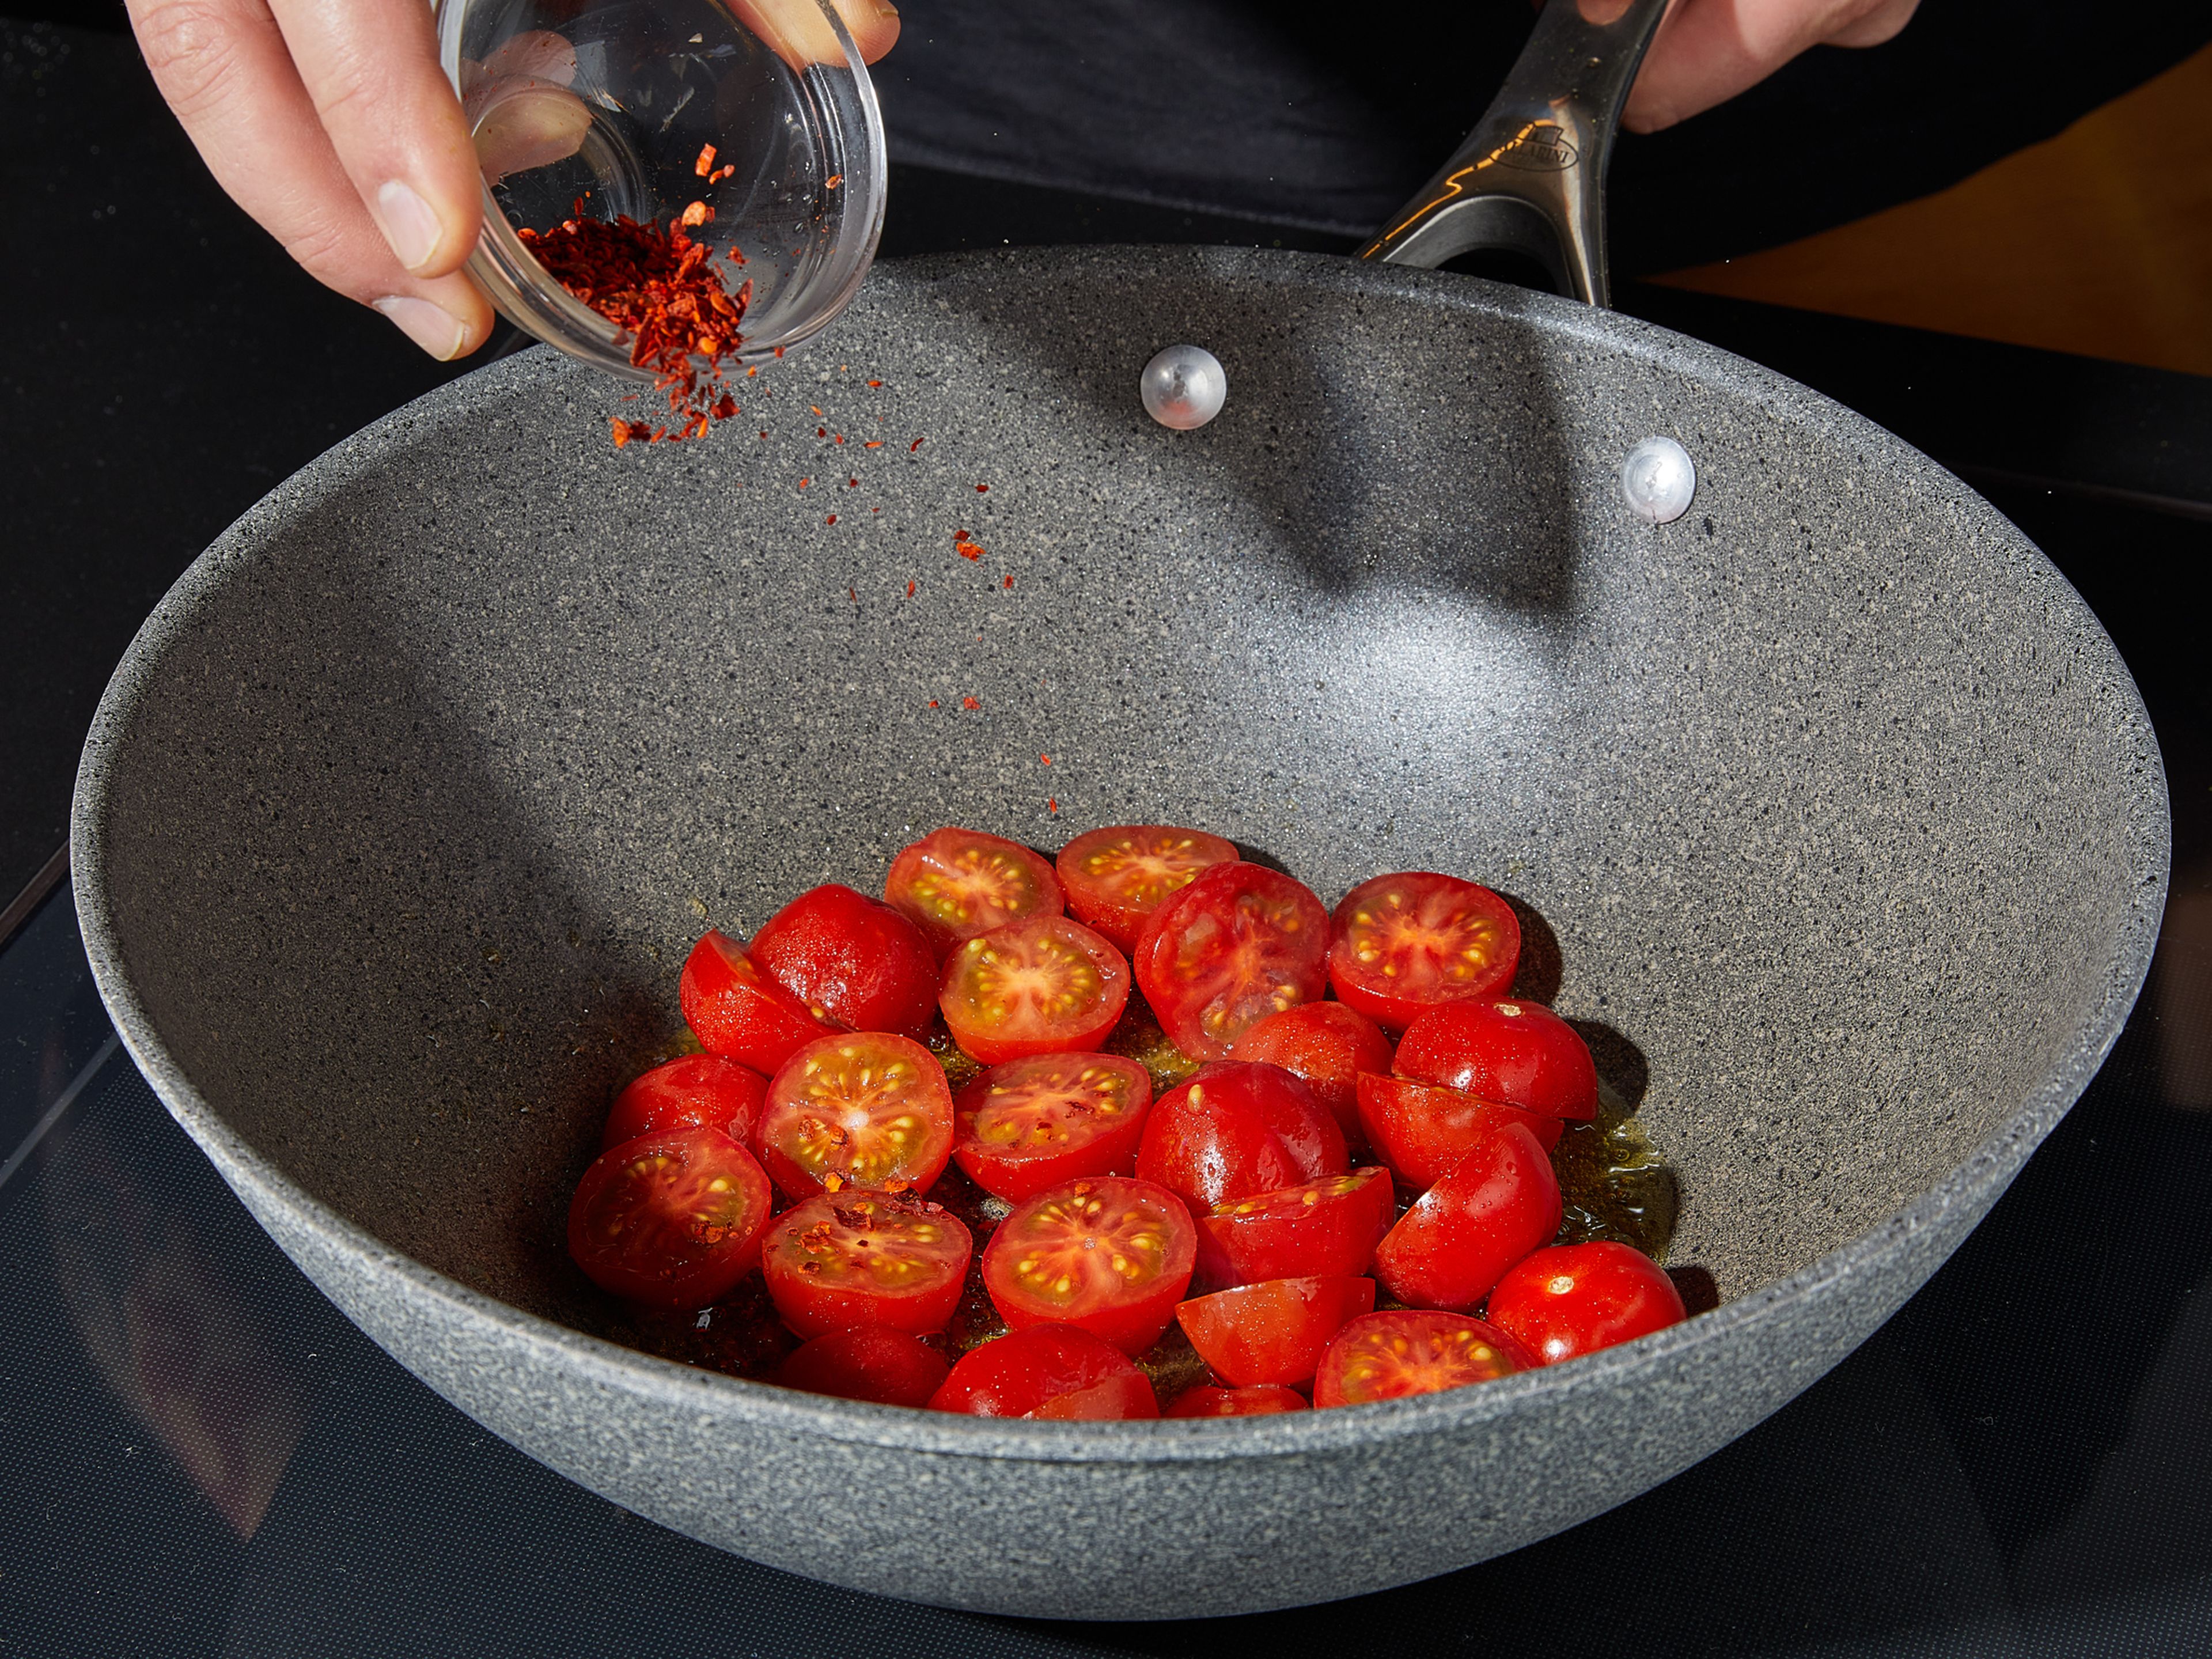 Bring a large pot of salted water to a boil. Meanwhile, in a dry pan, toast sunflower seeds over medium-high heat, tossing often, until slightly browned. Remove and set aside. Add olive oil to the used pan and heat. Add garlic and chili flakes, sauté briefly until fragrant, about 1 – 2 min. Now add cherry tomatoes and continue sauté for about 2 min.